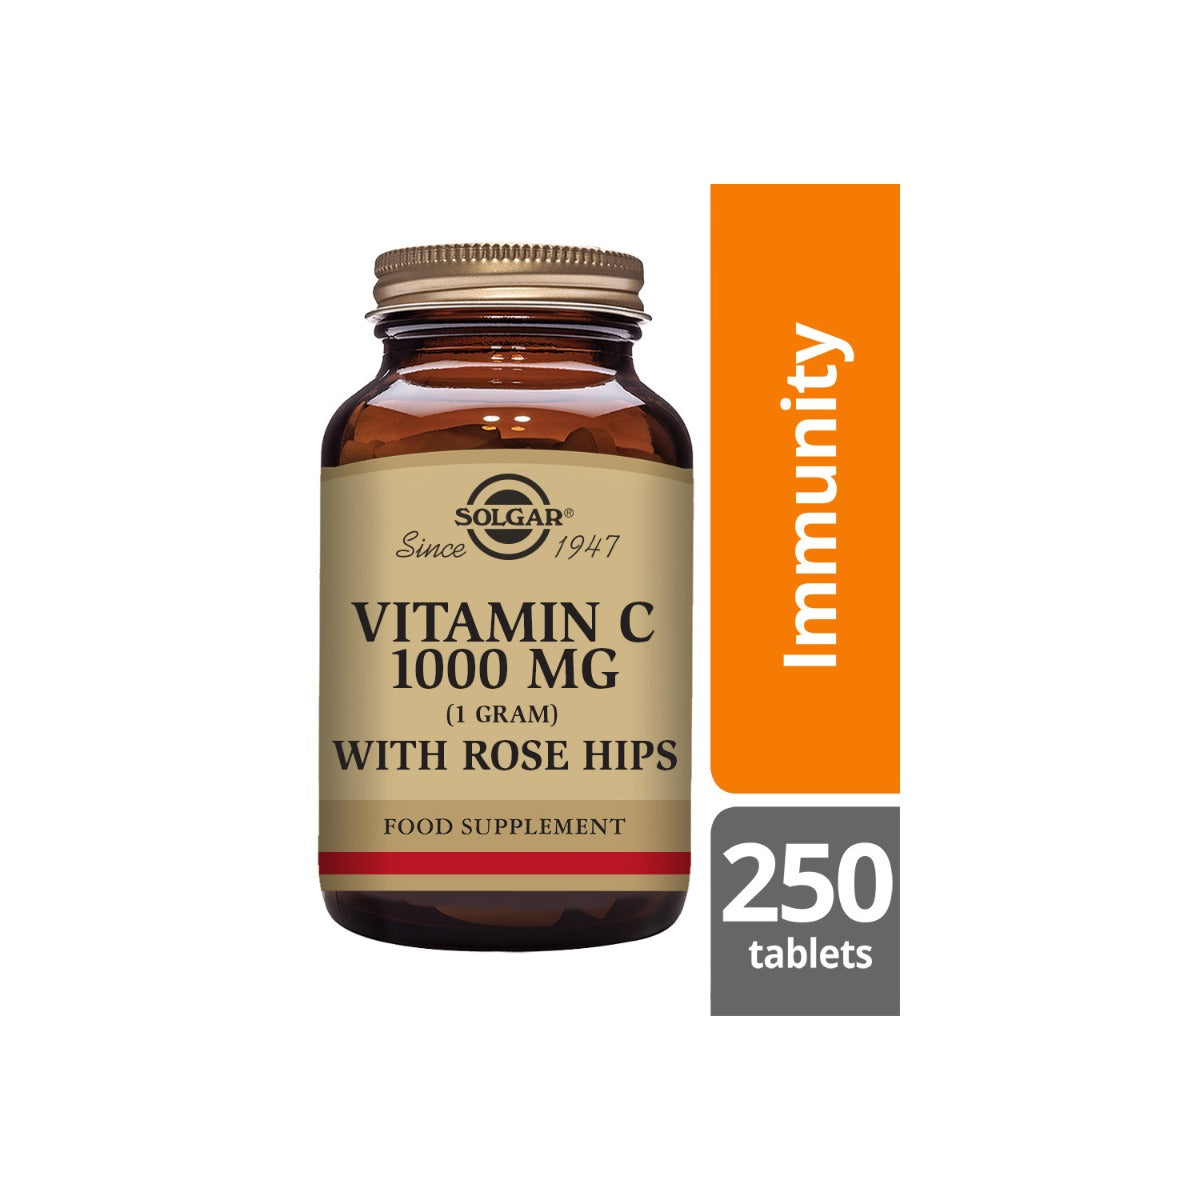 Solgar® Vitamin C 1000 mg with Rose Hips Tablets - Pack of 250